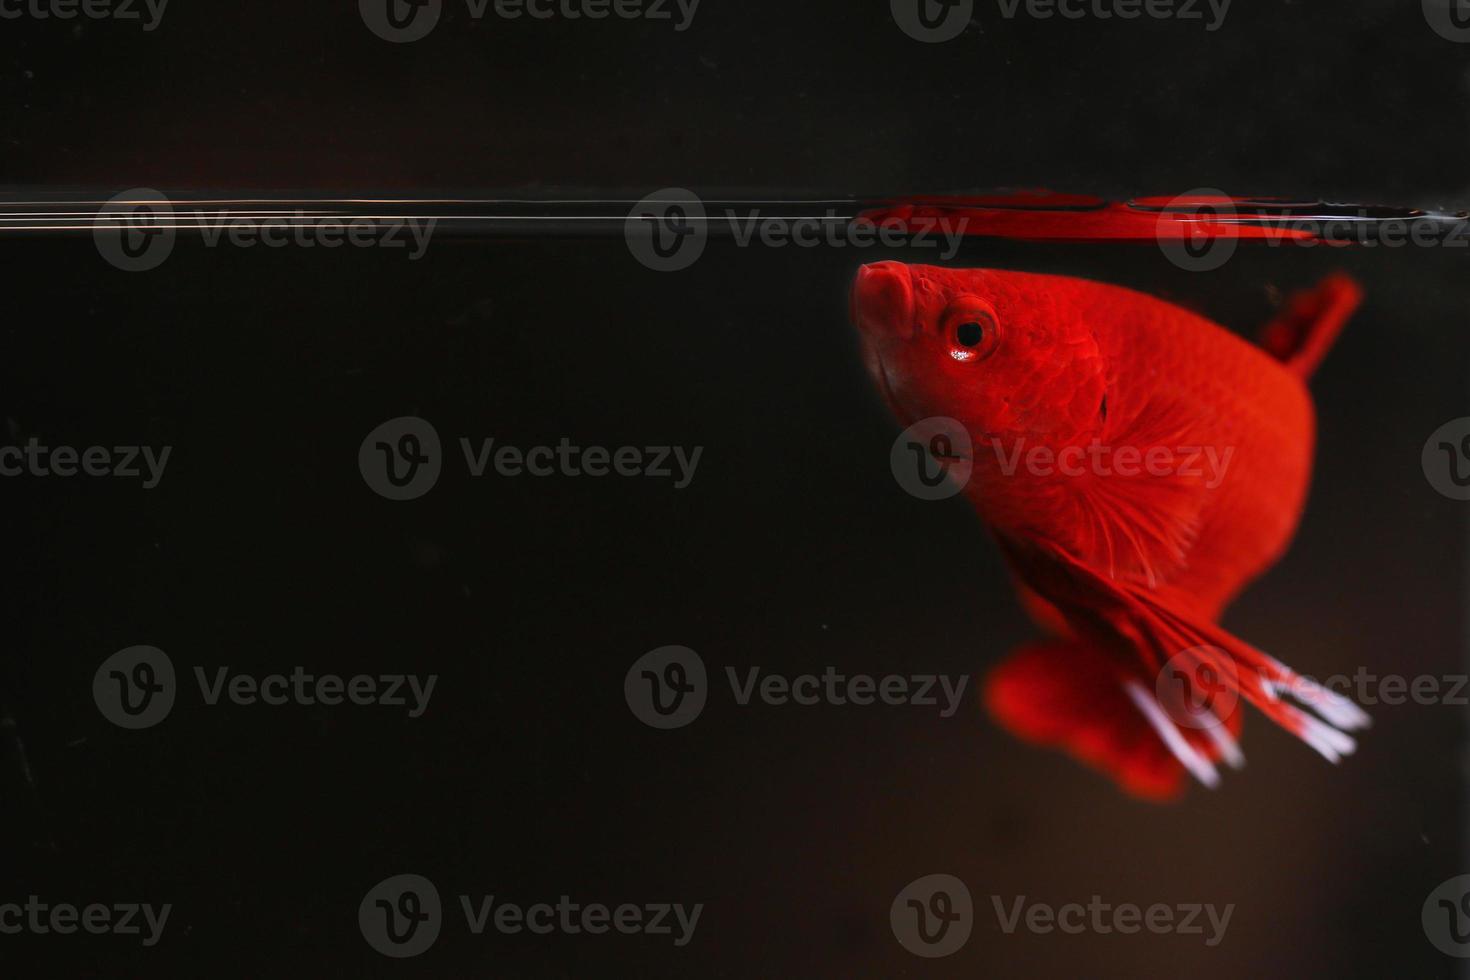 Super red betta fish with dark background. Siamese fighting fish solid red color splendid. photo